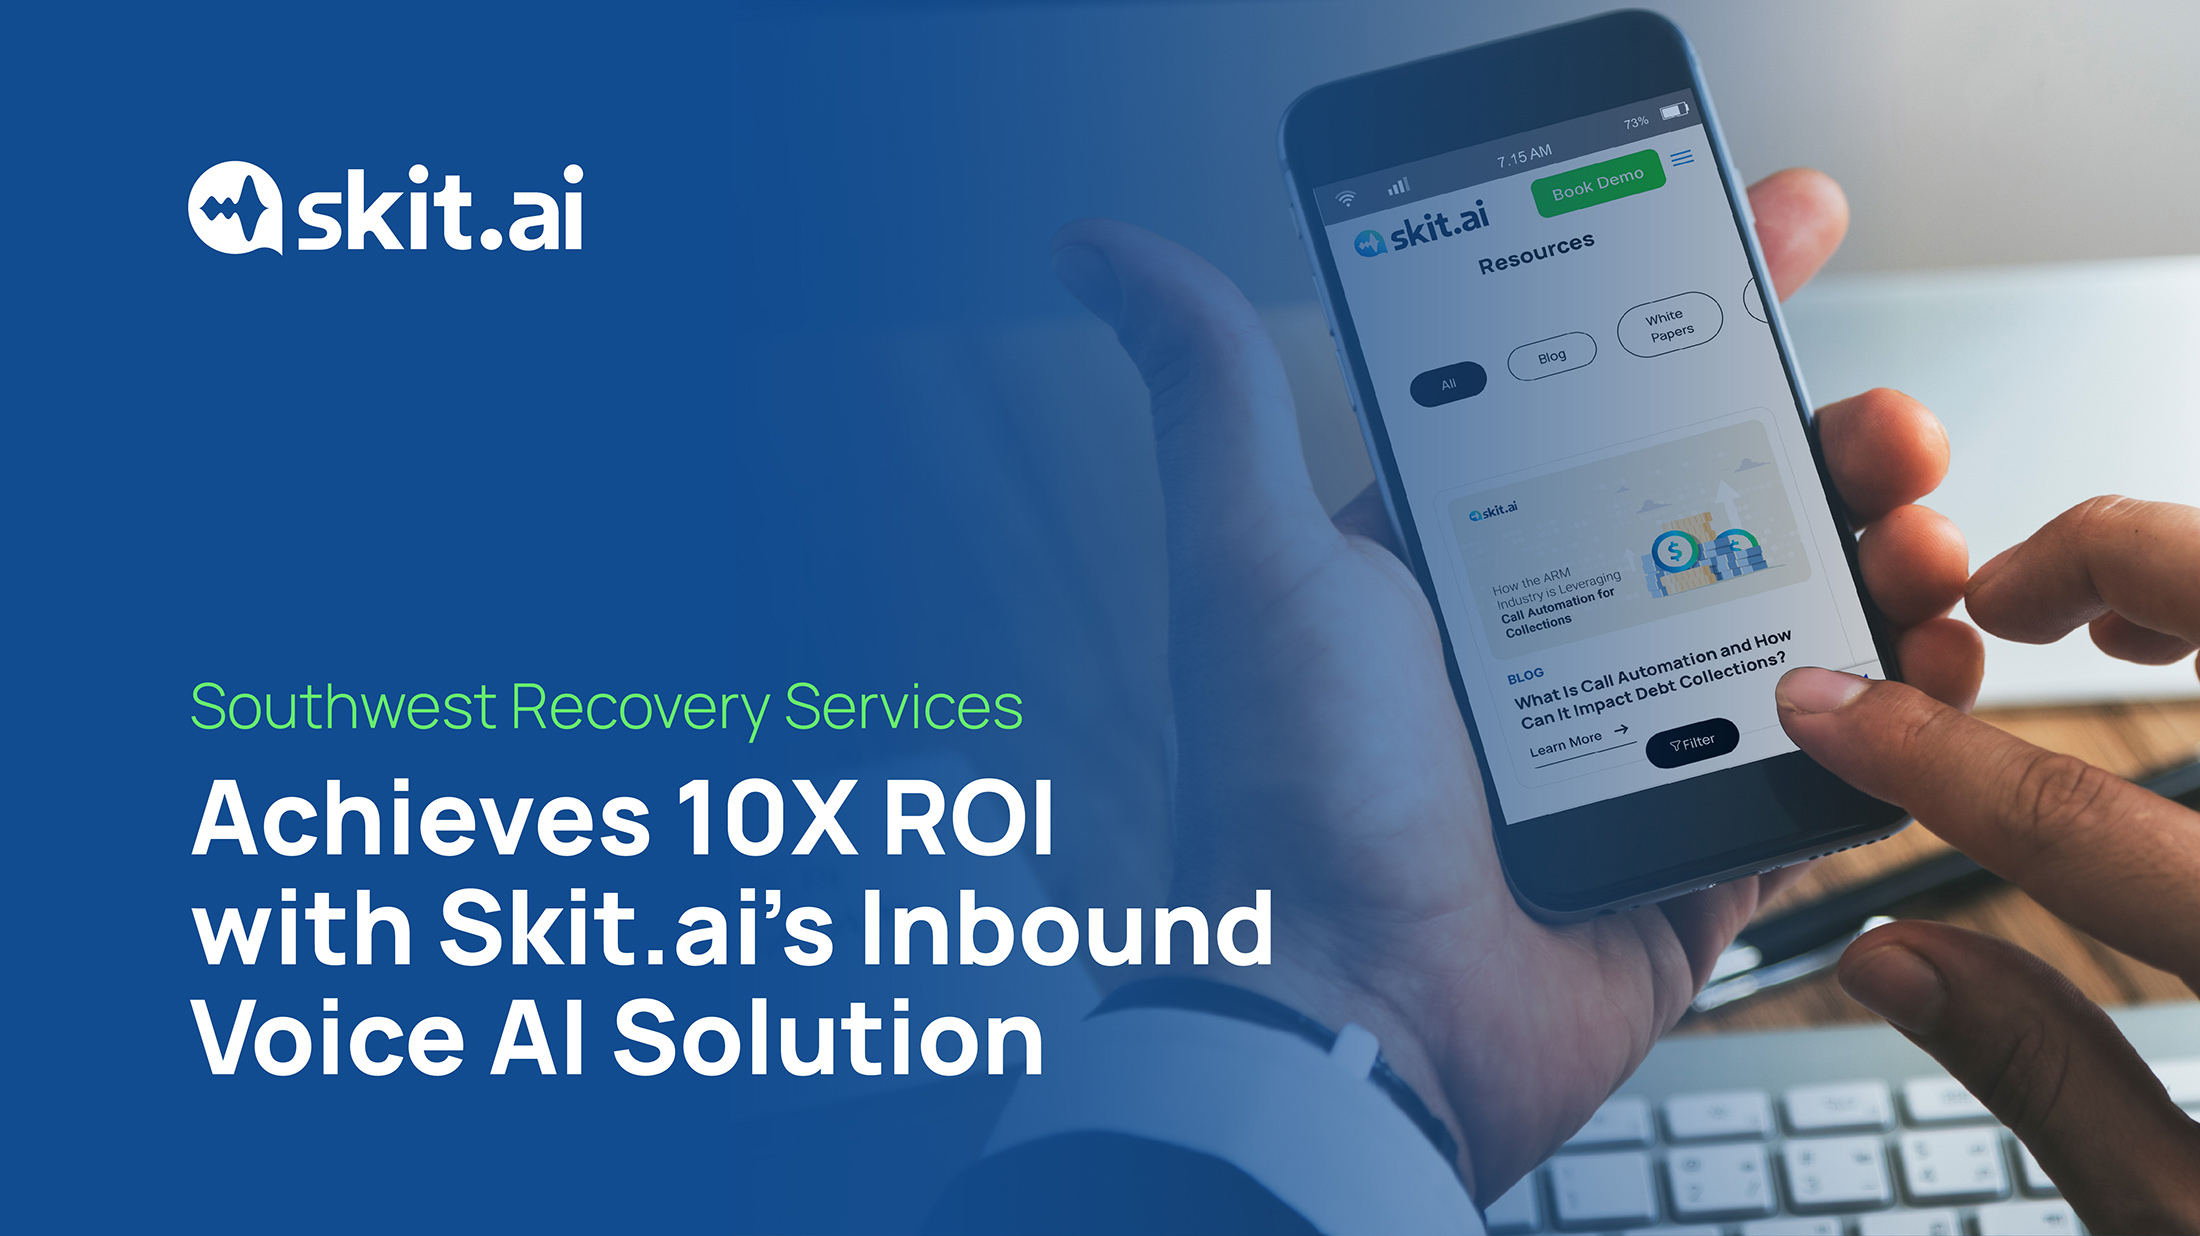 Southwest Recovery’s 10X ROI with Skit.ai’s Inbound Voice AI Solution